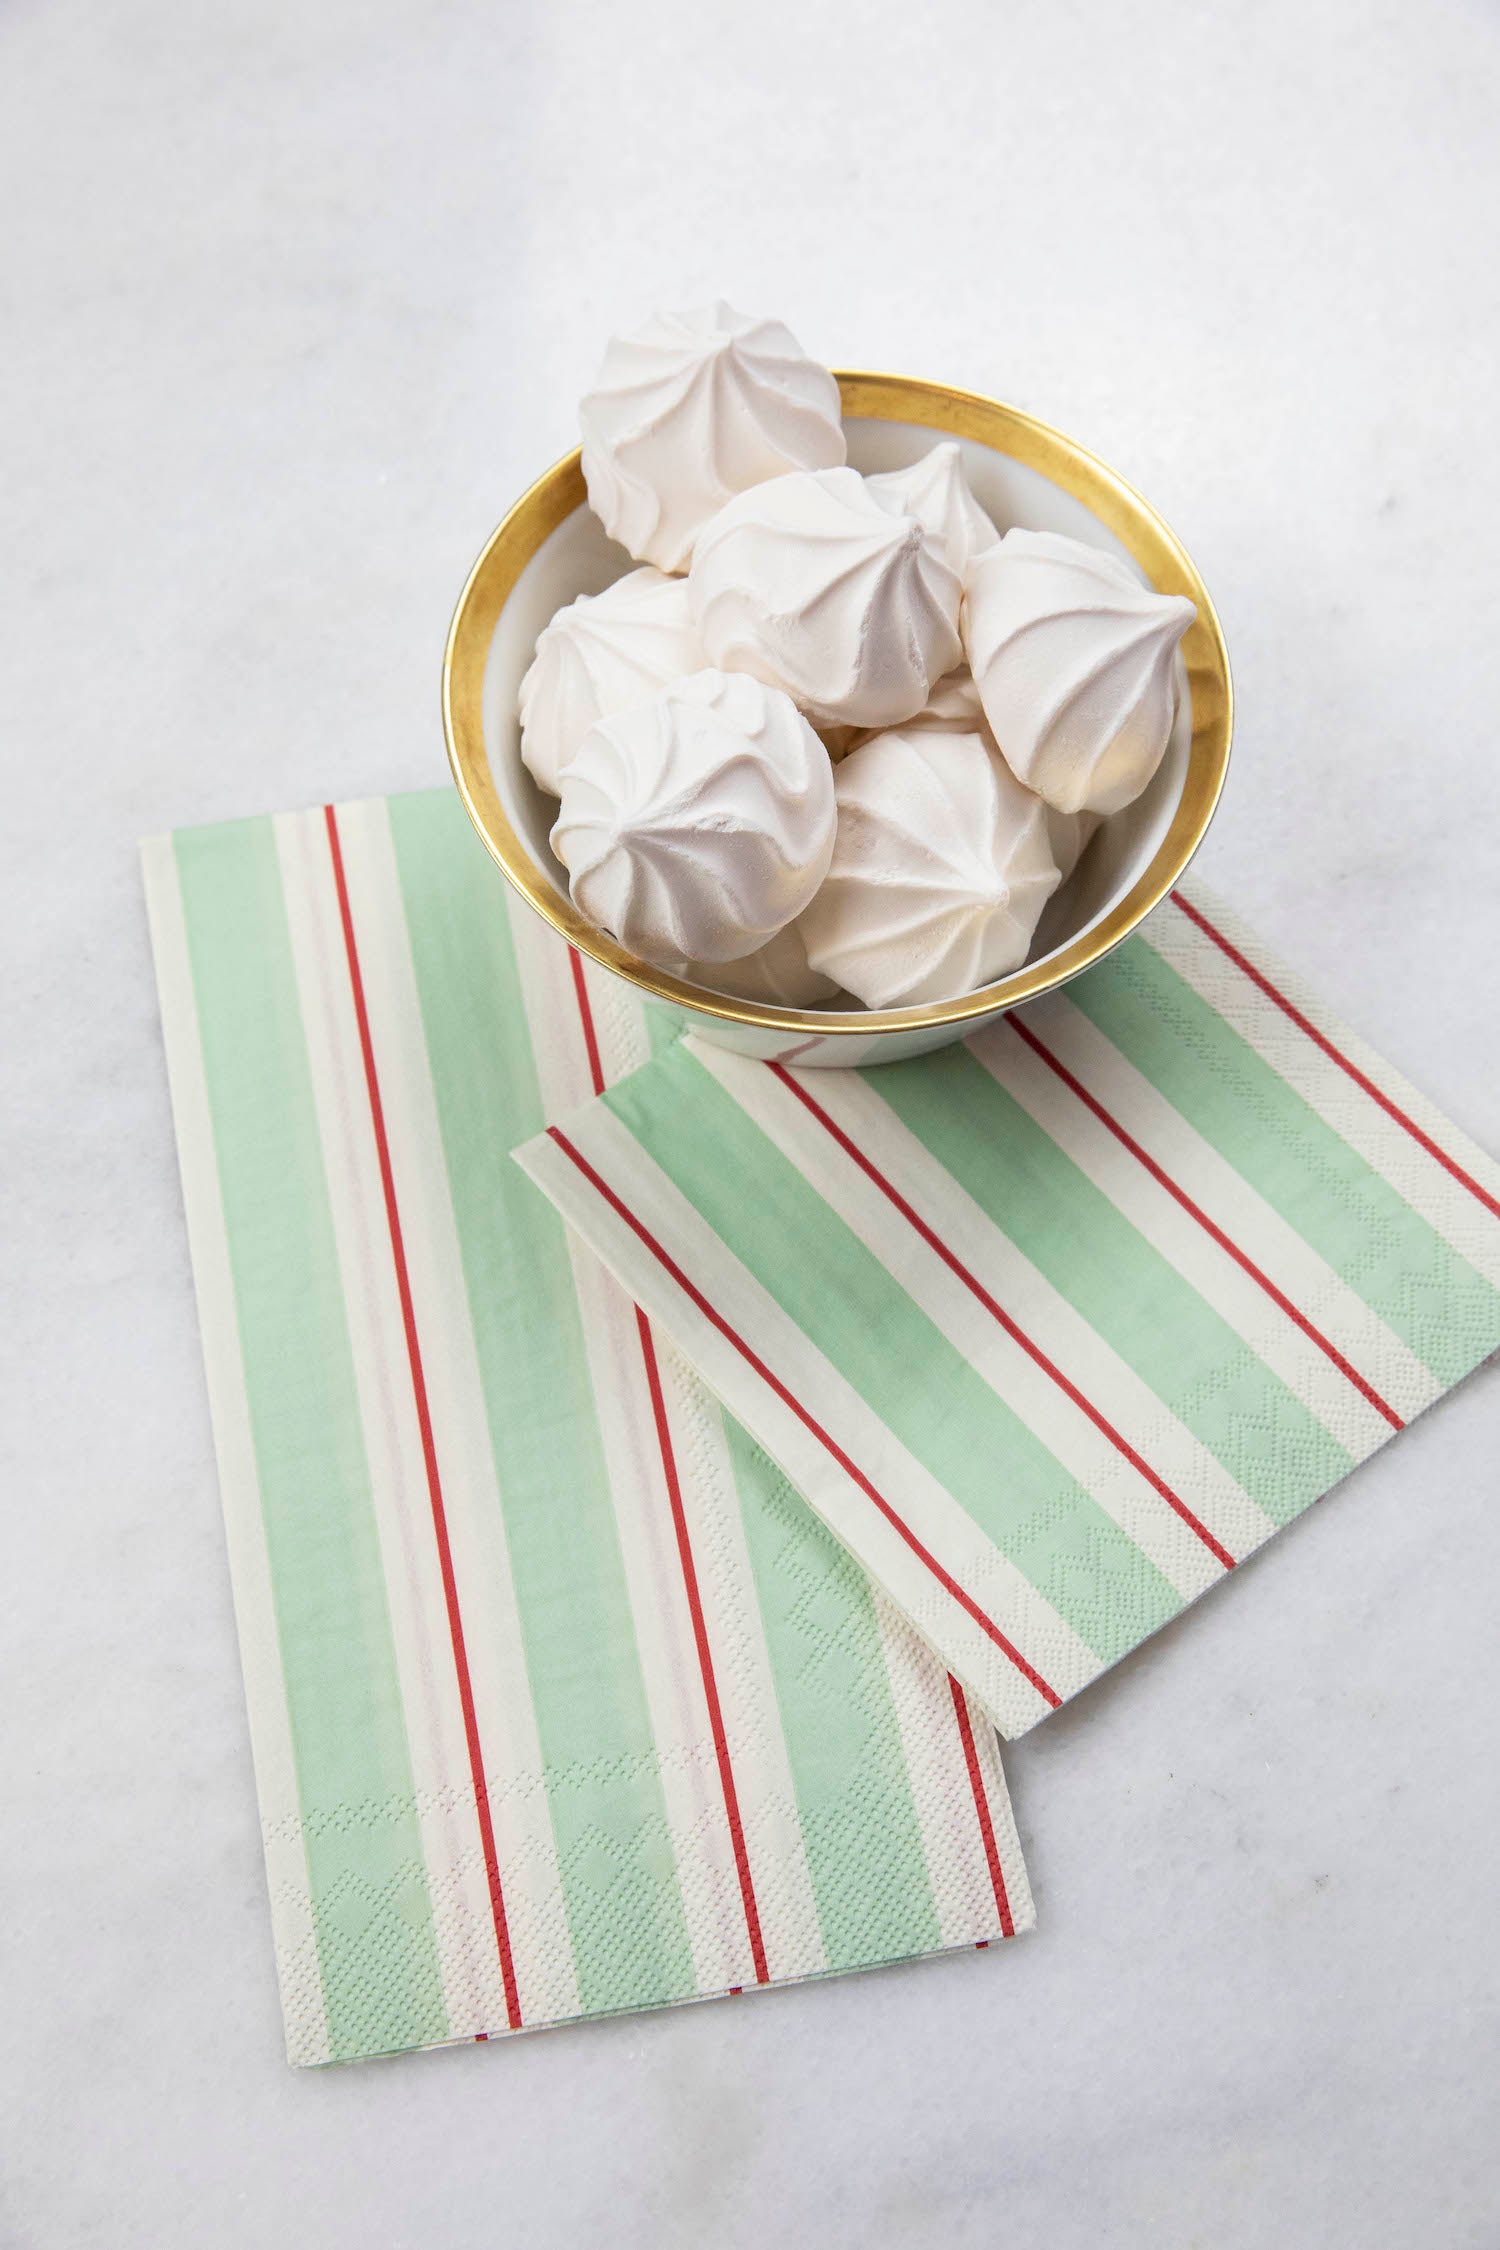 Seafoam &amp; Red Awning Stripe napkins with white meringue on top, perfect for a festive party table setting. (Hester &amp; Cook)